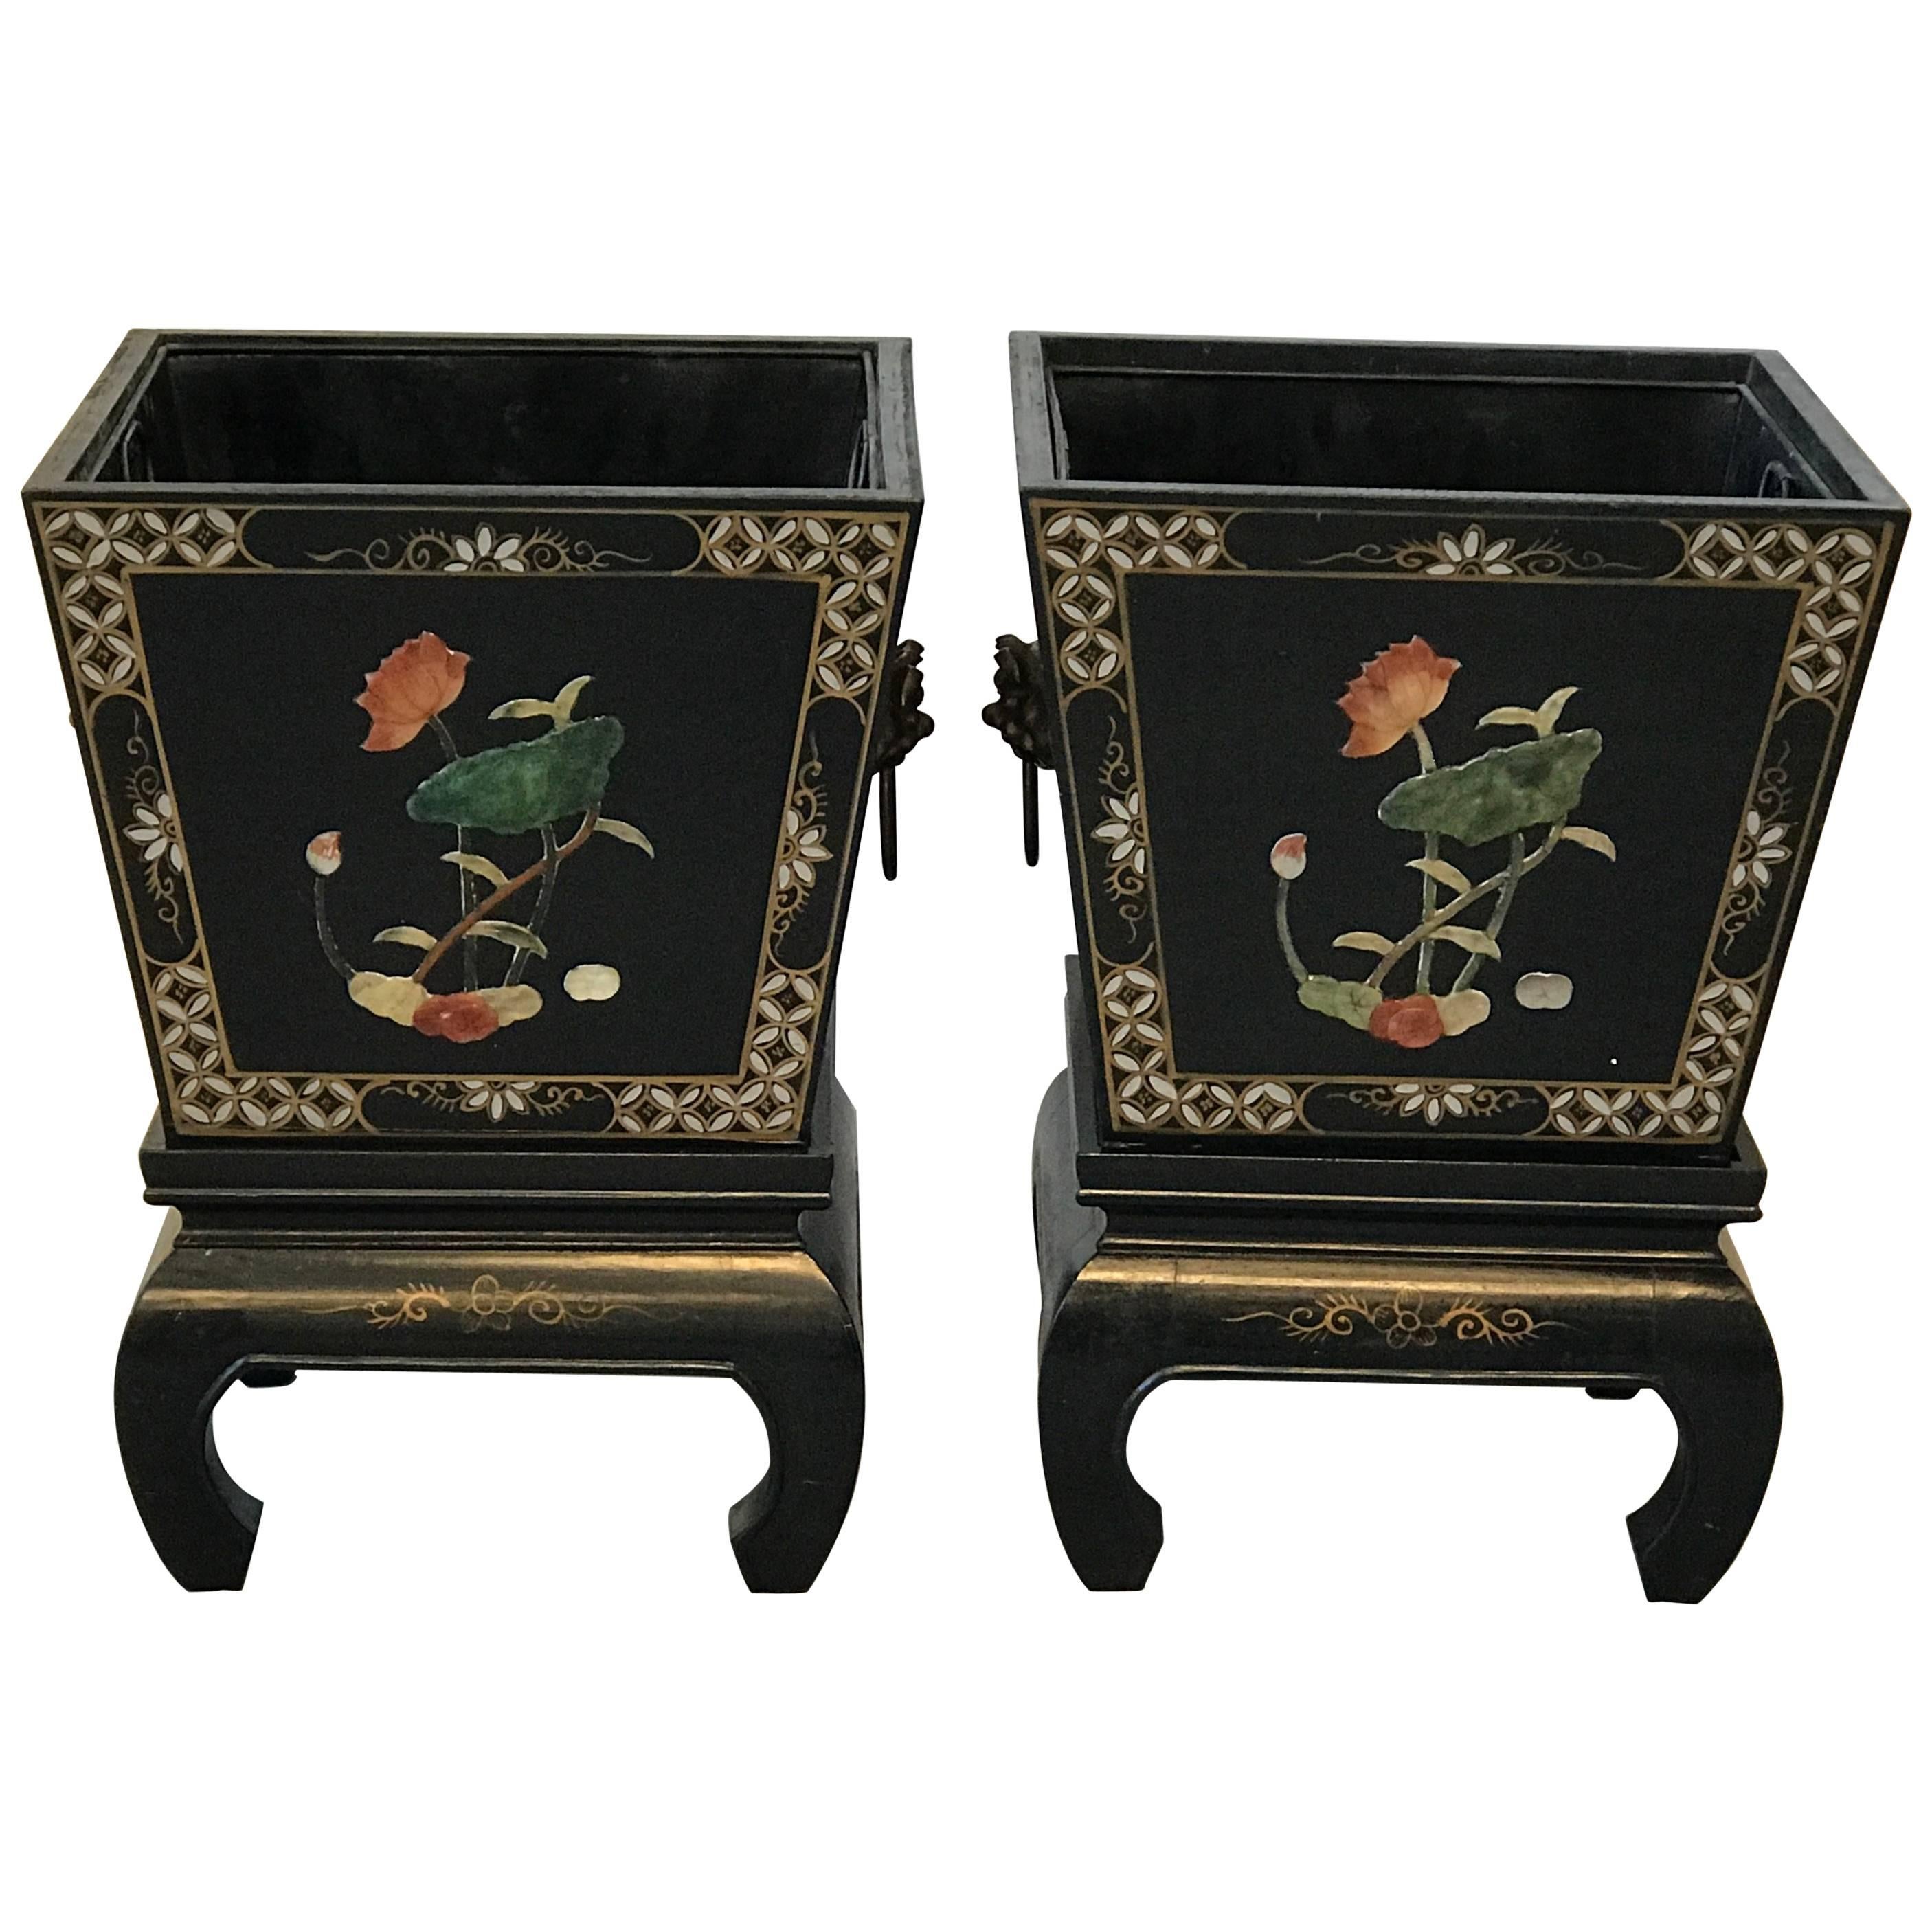 1960s Black and Gold Asian Planters on Stands with Brass Foo Dog Handles, Pair